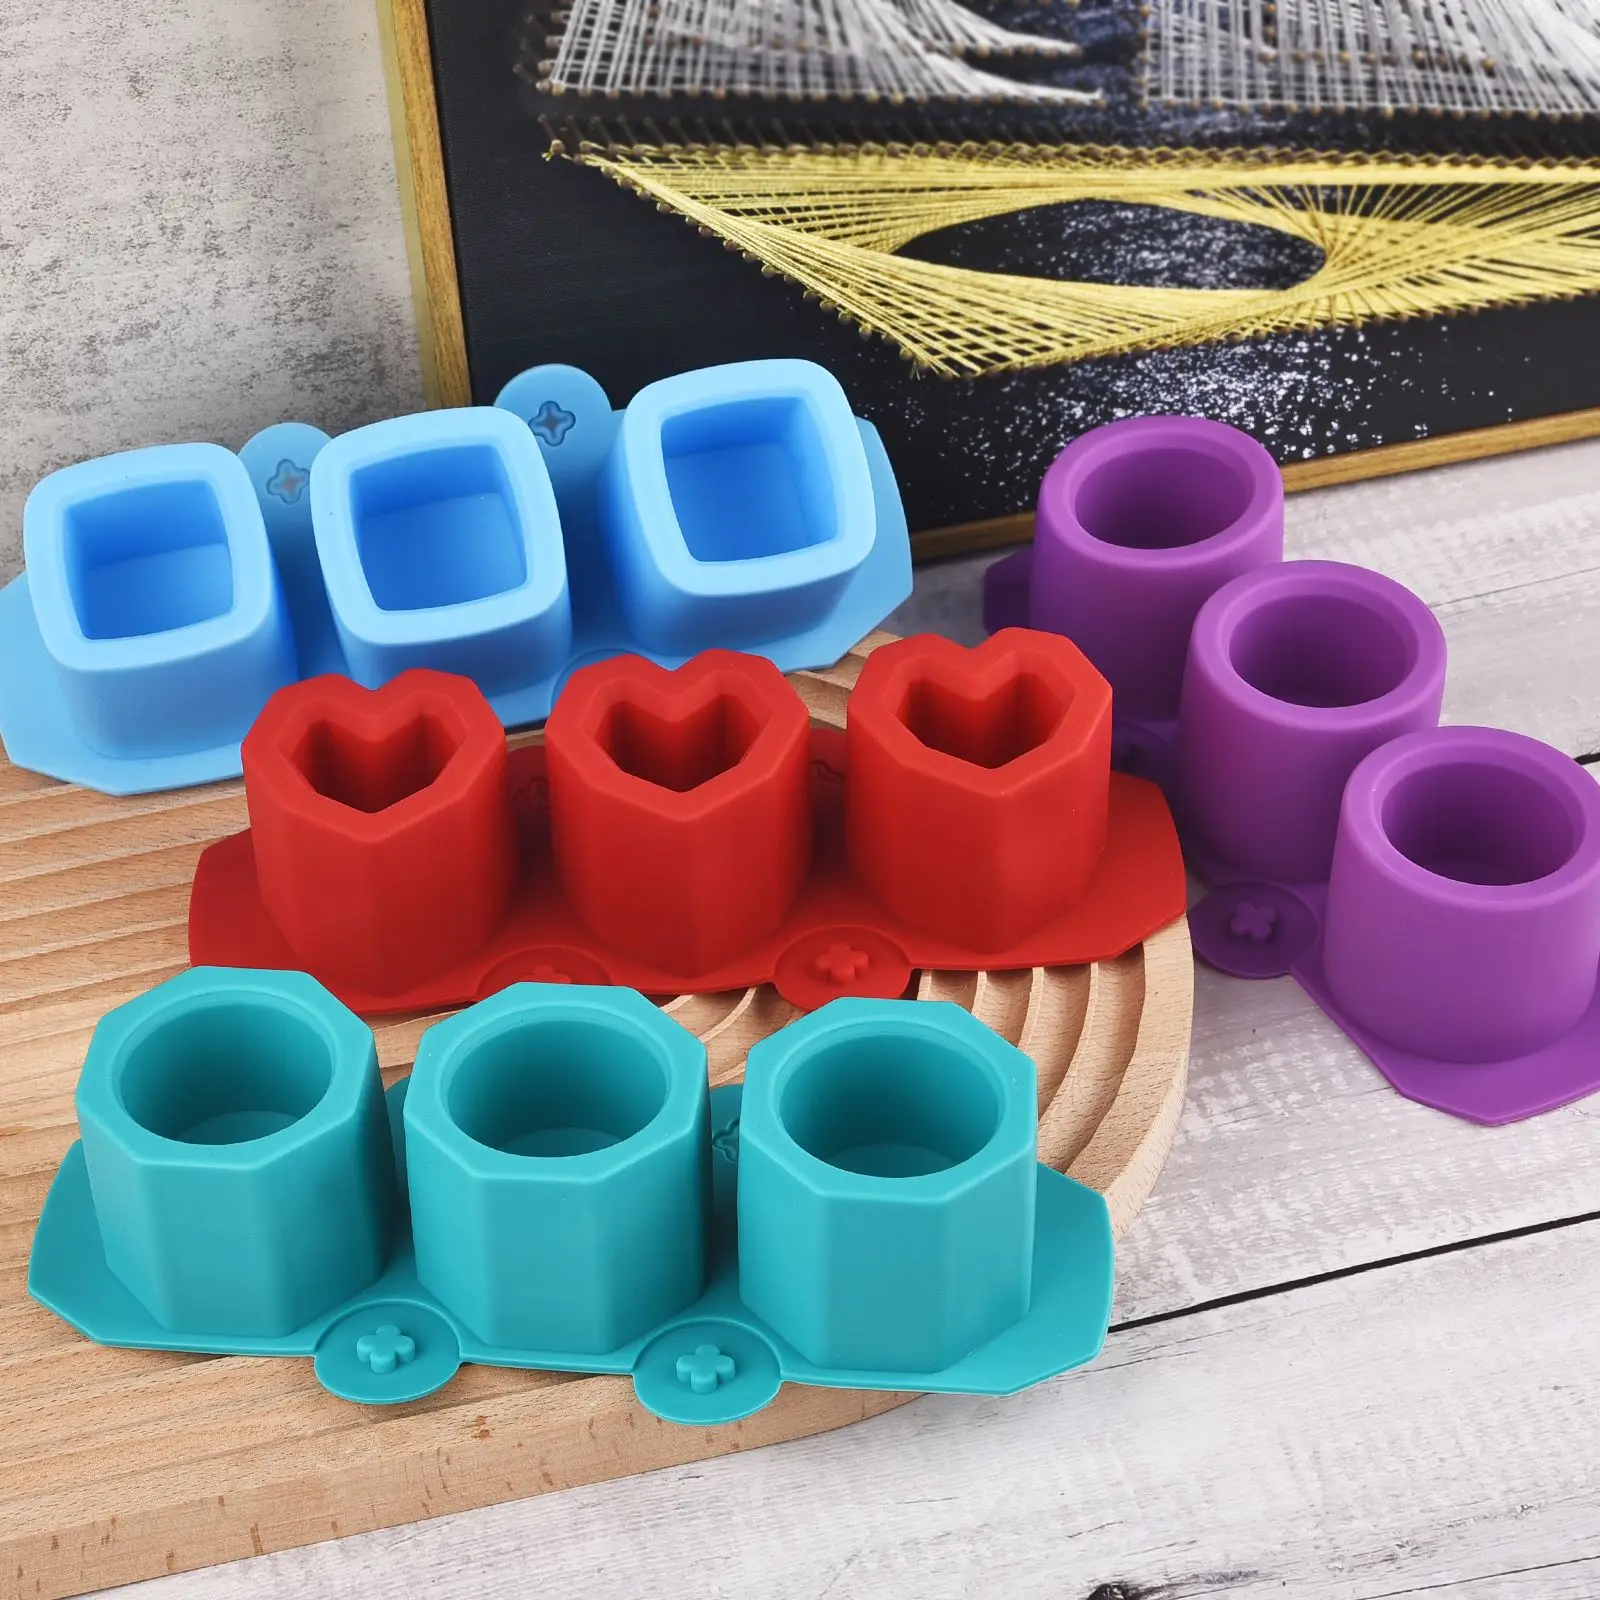 

4Pcs/Set Gypsum Candle Jar Silicone Molds For DIY Plaster Cement Concrete Planter Pot Ice Cup Mould Home Decor Jewelry Making